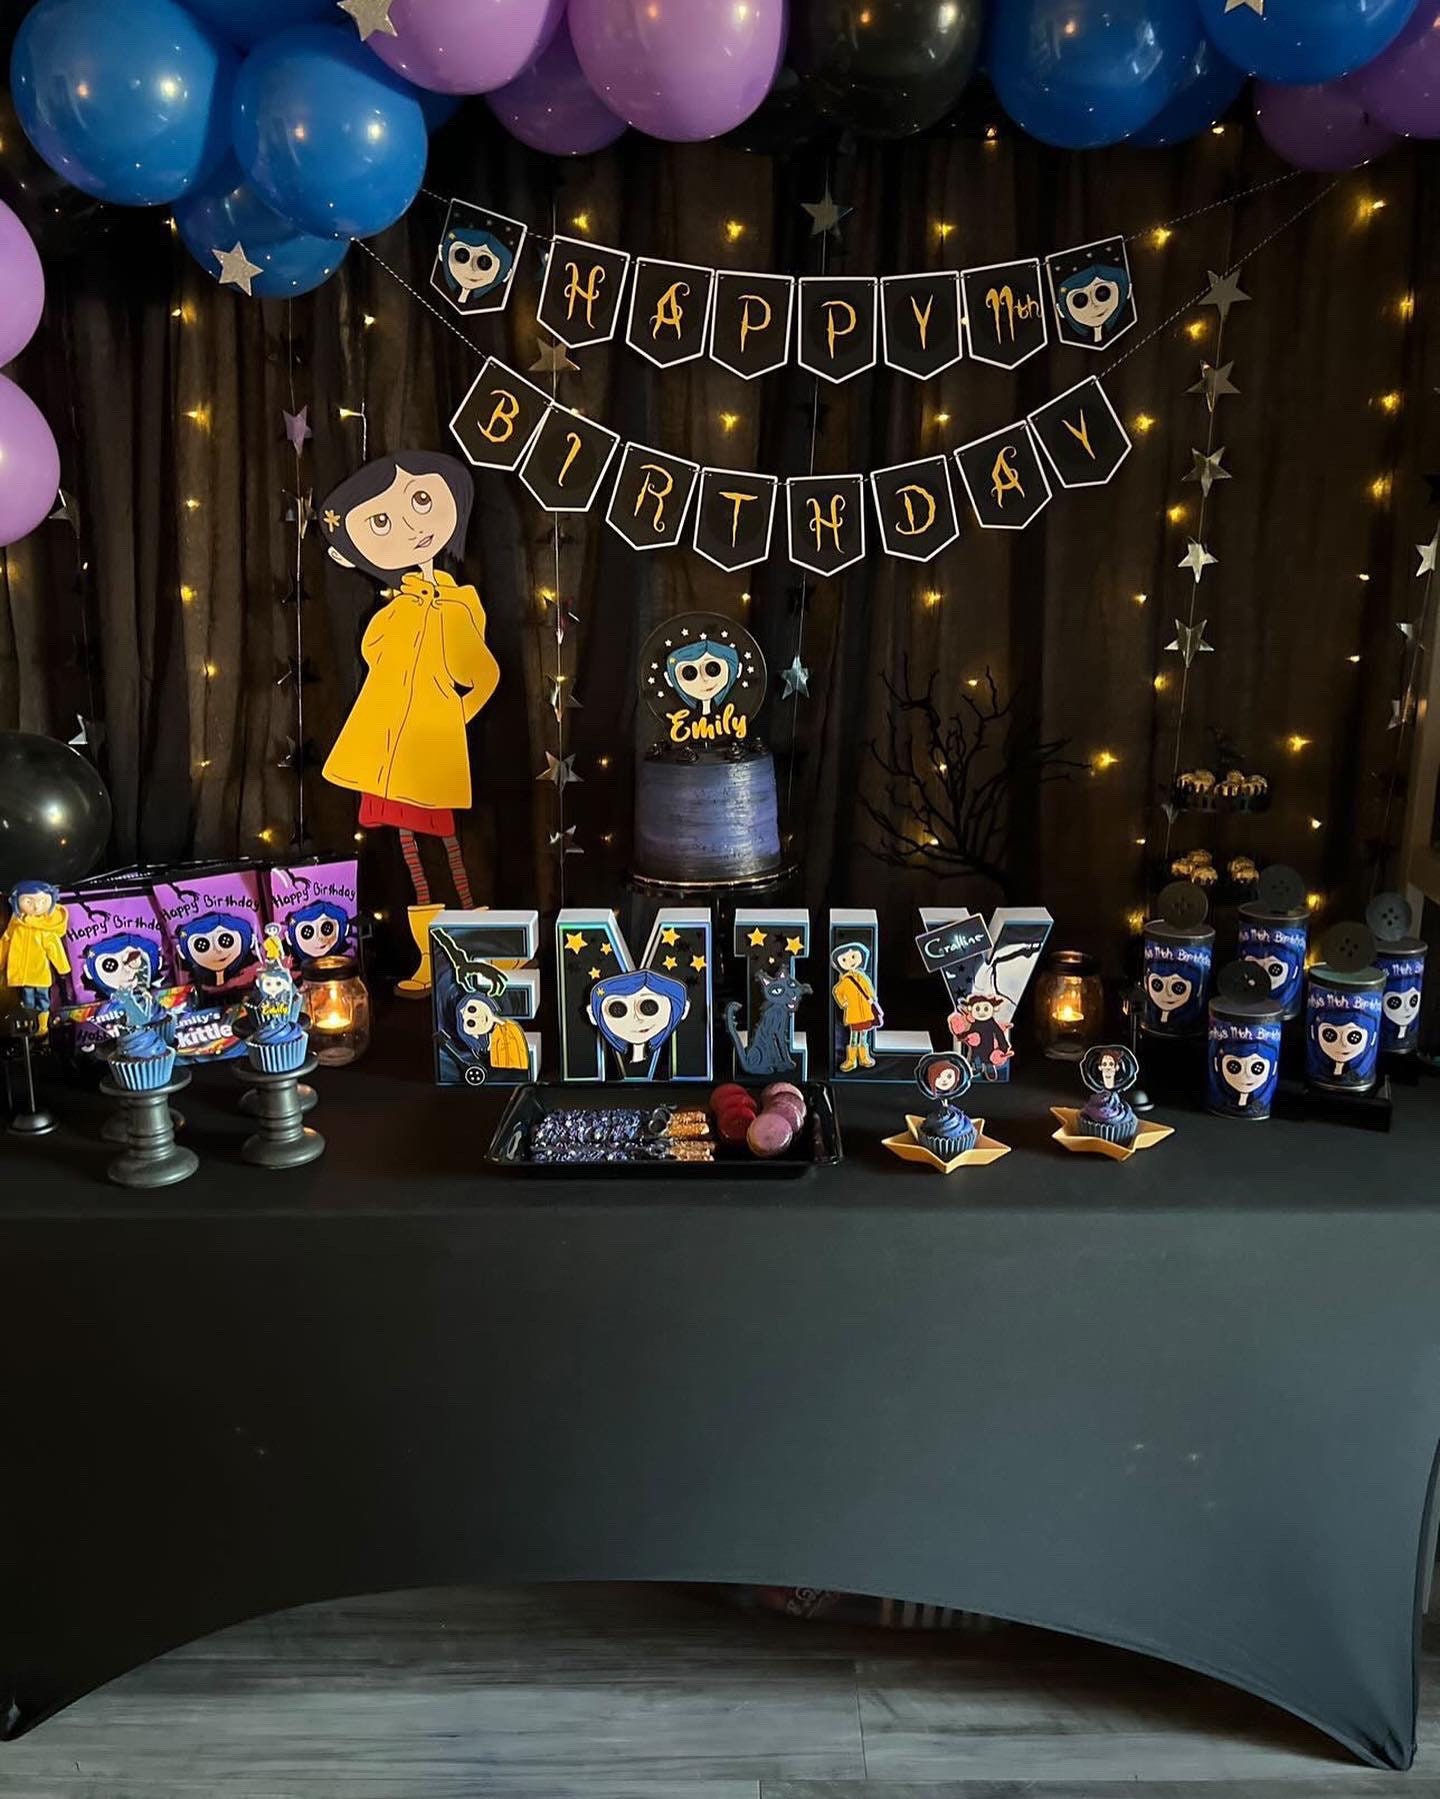 Coraline Birthday Party Decorations,8Pcs Coraline Theme Party Centerpieces  for Tables,Photo Booth Props, Cake Toppers, Coraline Party Supplies for